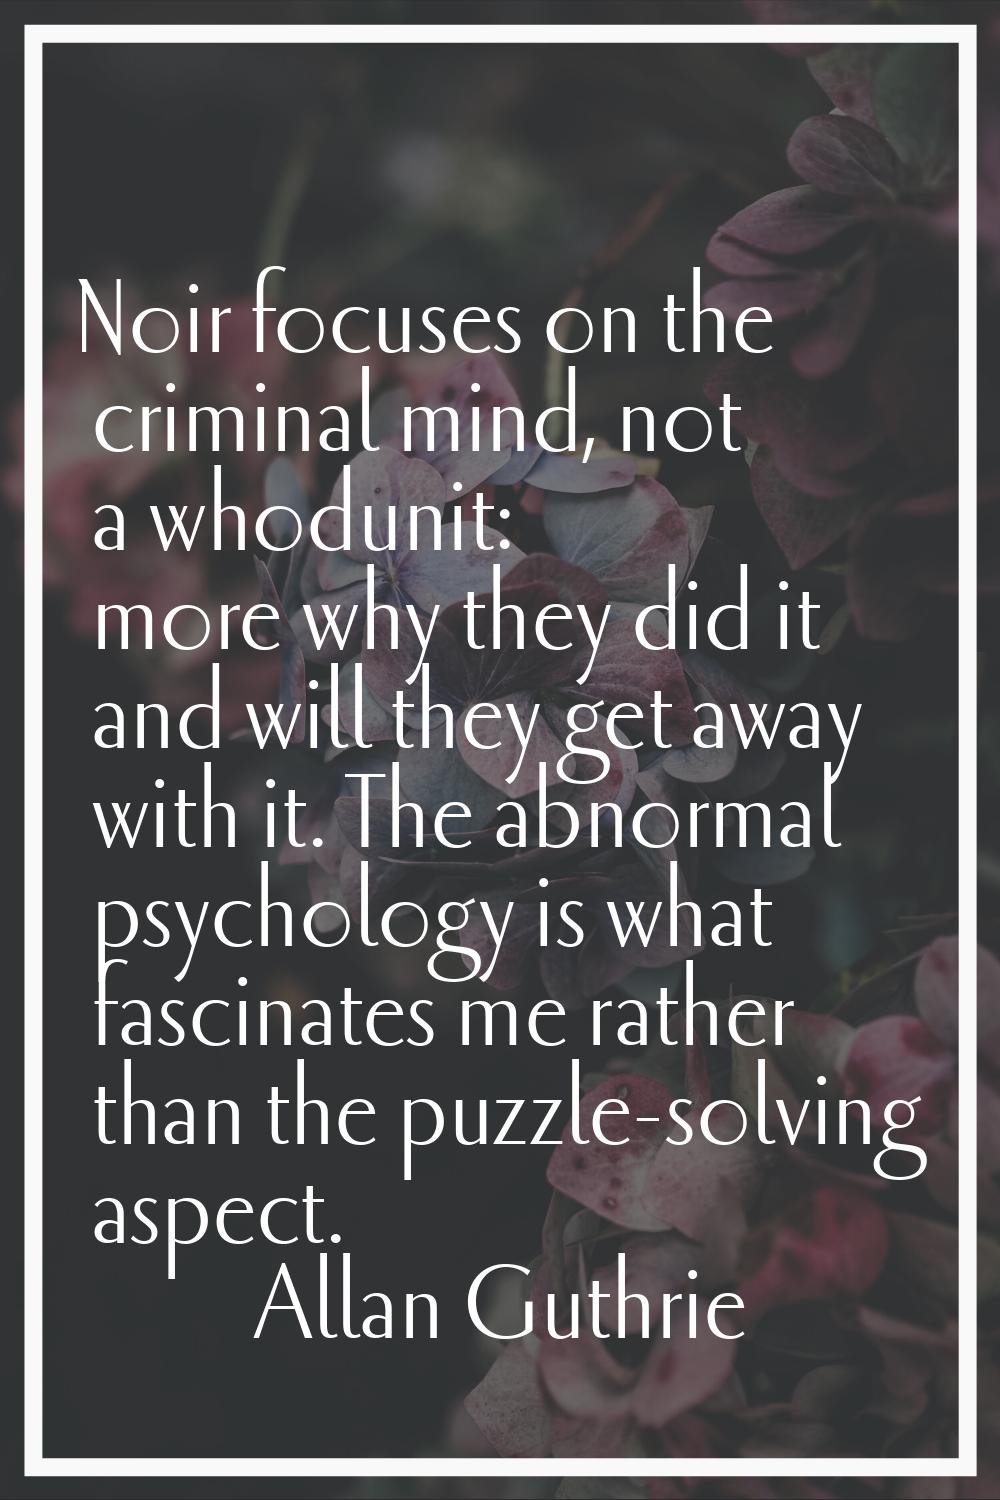 Noir focuses on the criminal mind, not a whodunit: more why they did it and will they get away with